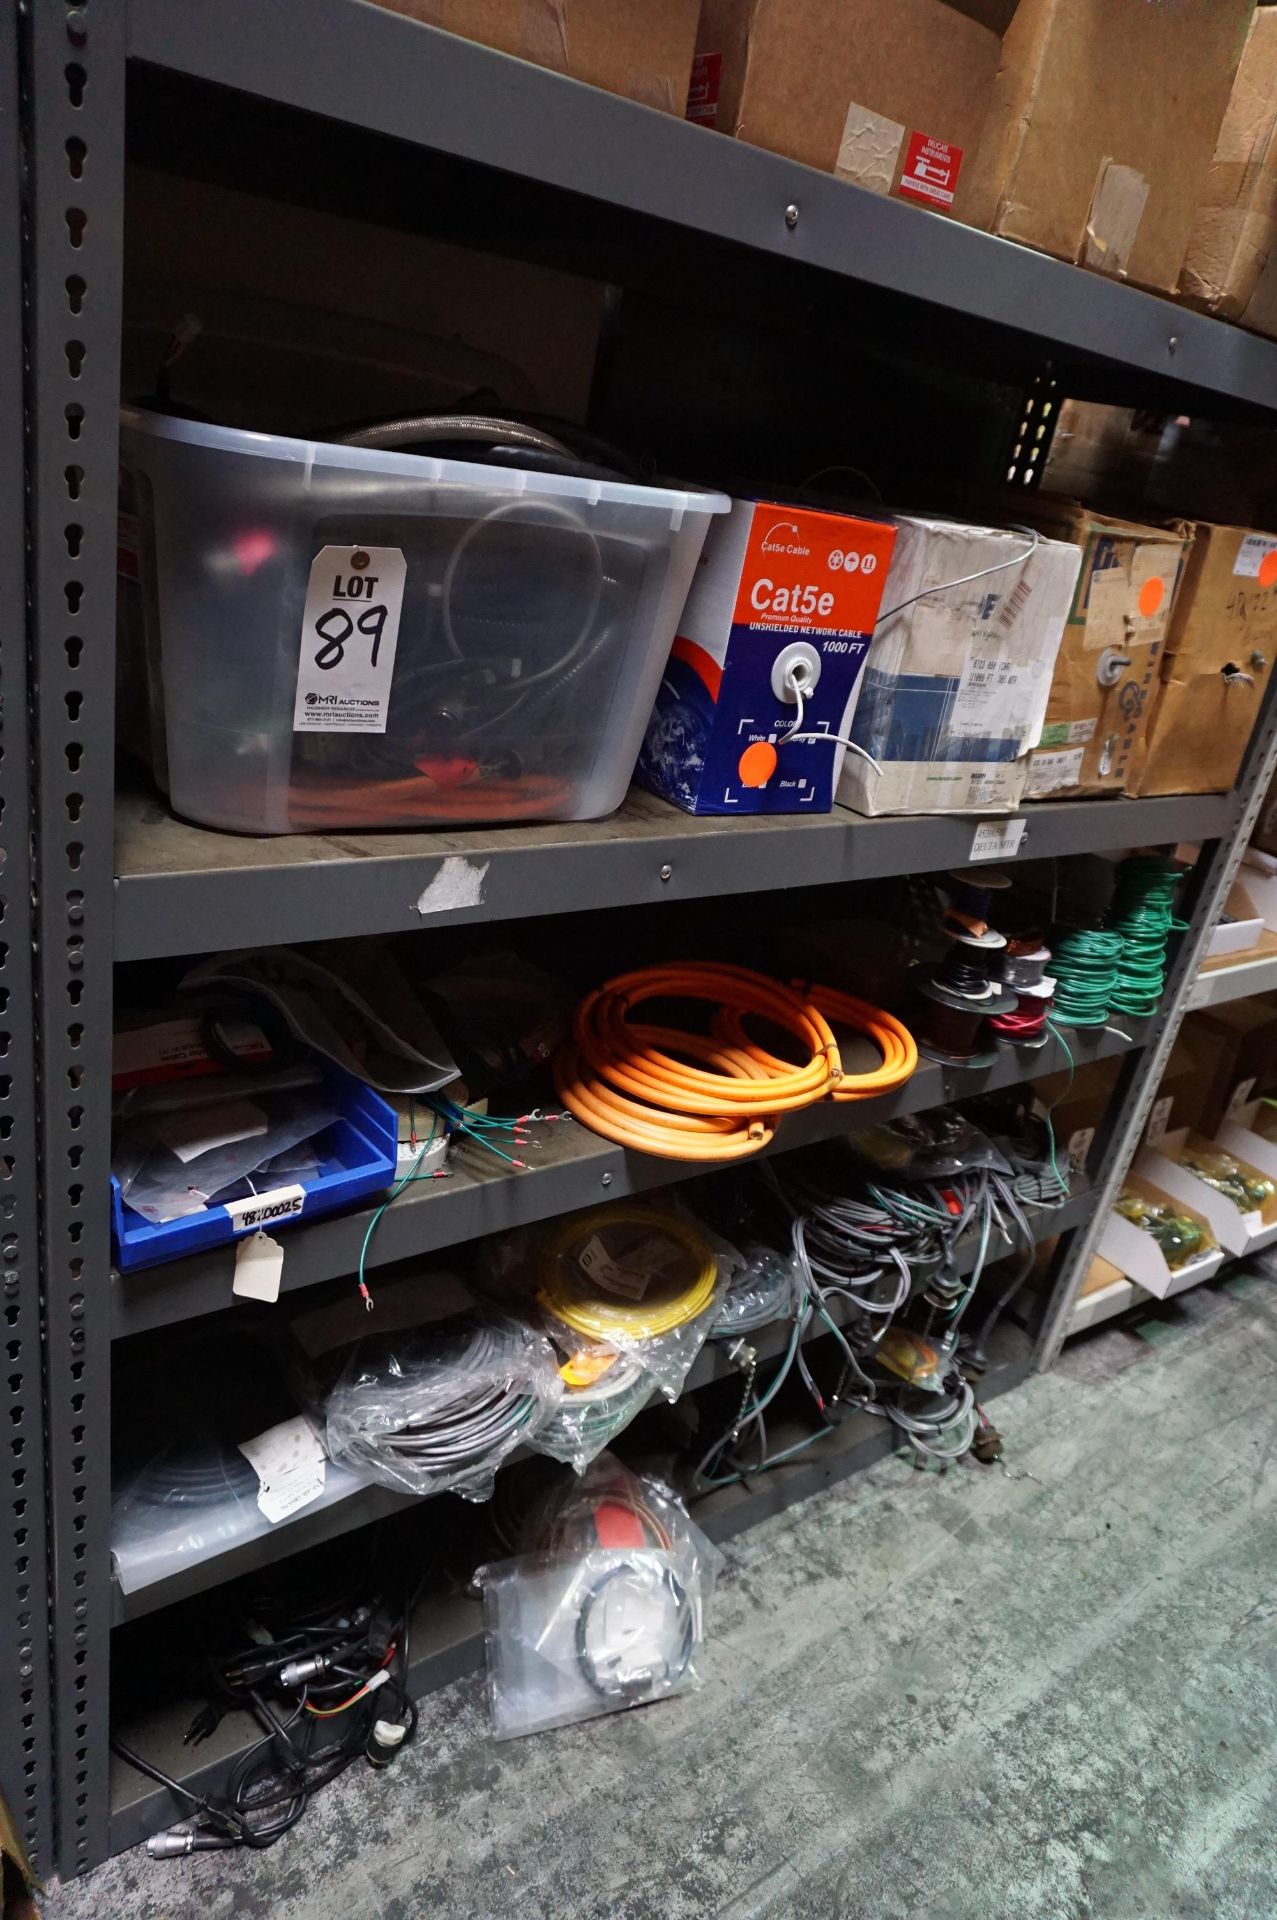 CONTENTS OF STEEL SHELVING TO INCLUDE BUT NOT LIMITED TO: MISC. CABLES AND WIRE, VARIED SIZES